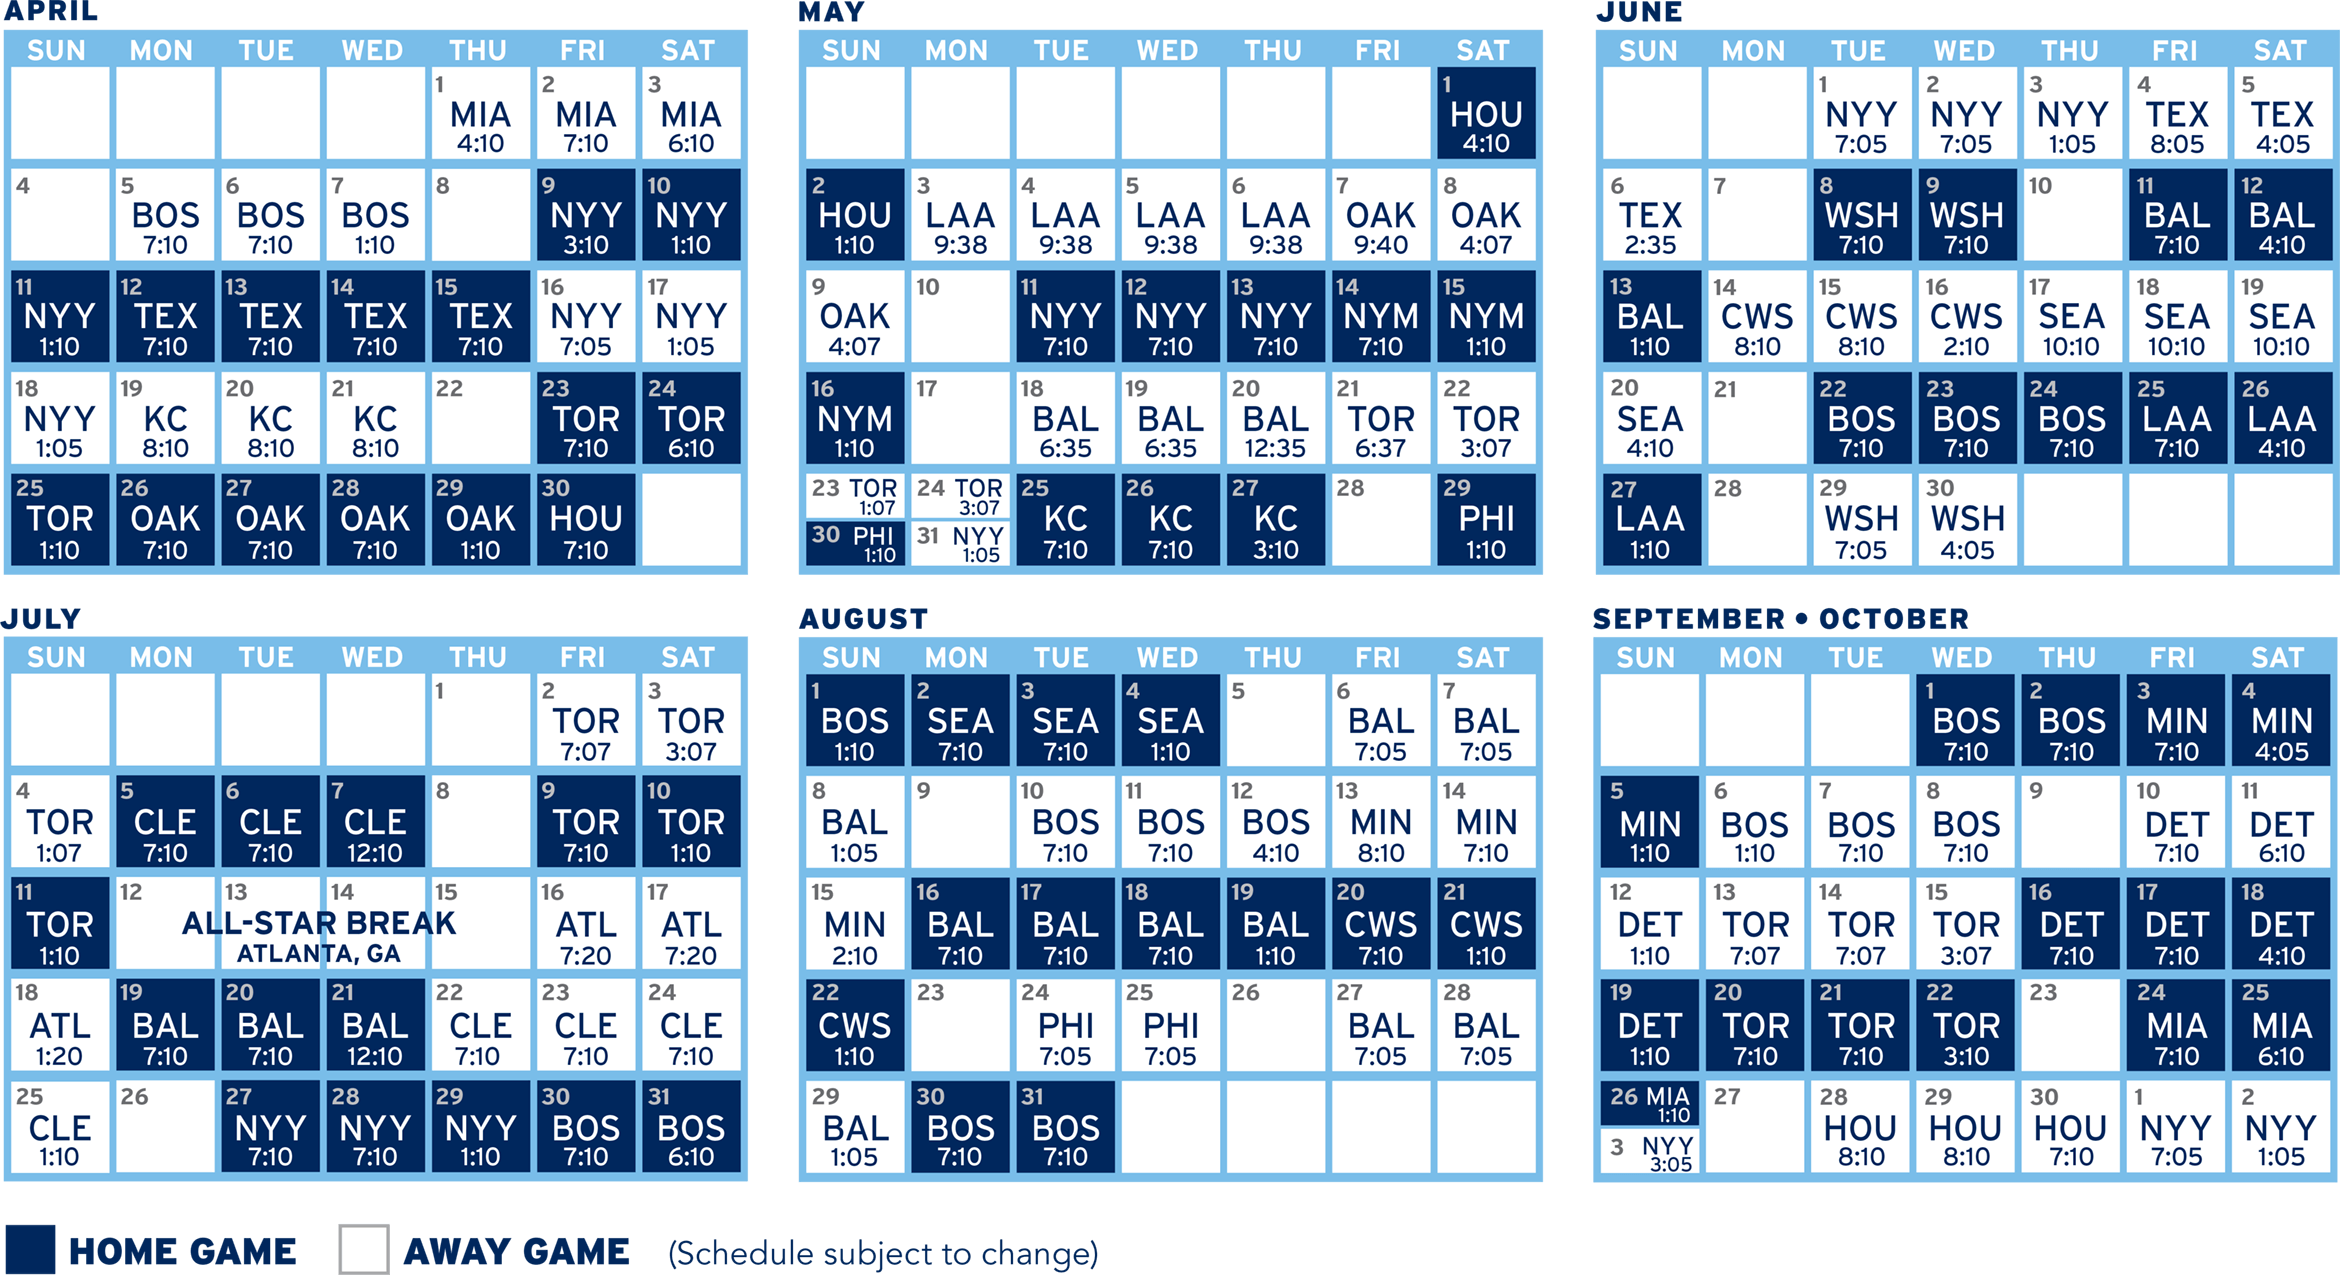 Download the 2021 Tampa Bay Rays Schedule